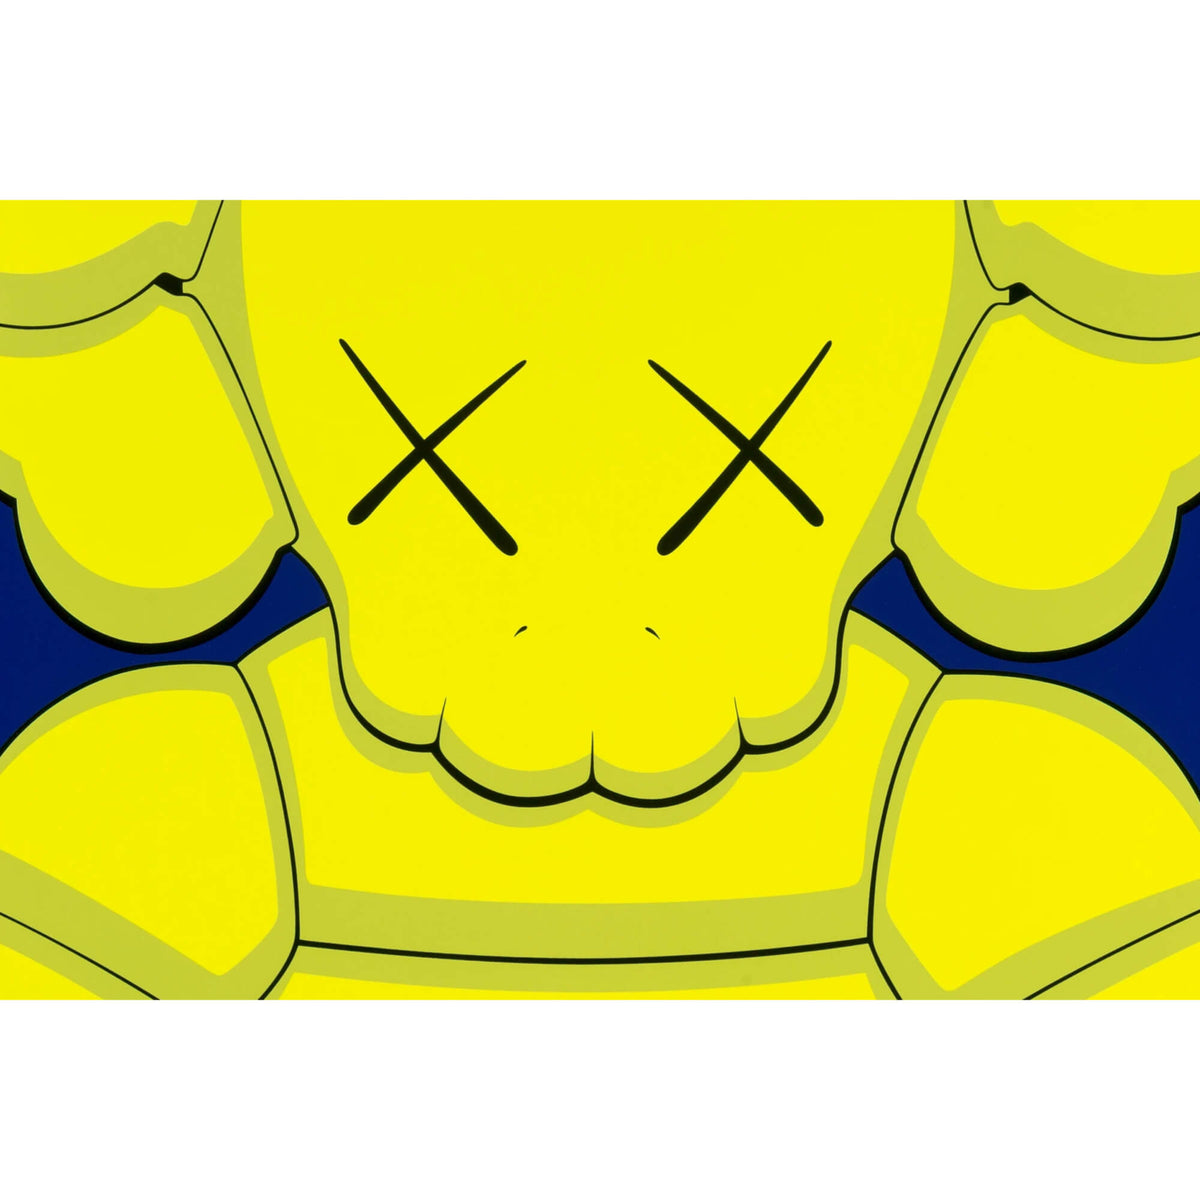 KAWS's What Party (Yellow On Blue) Print - Hype Museum